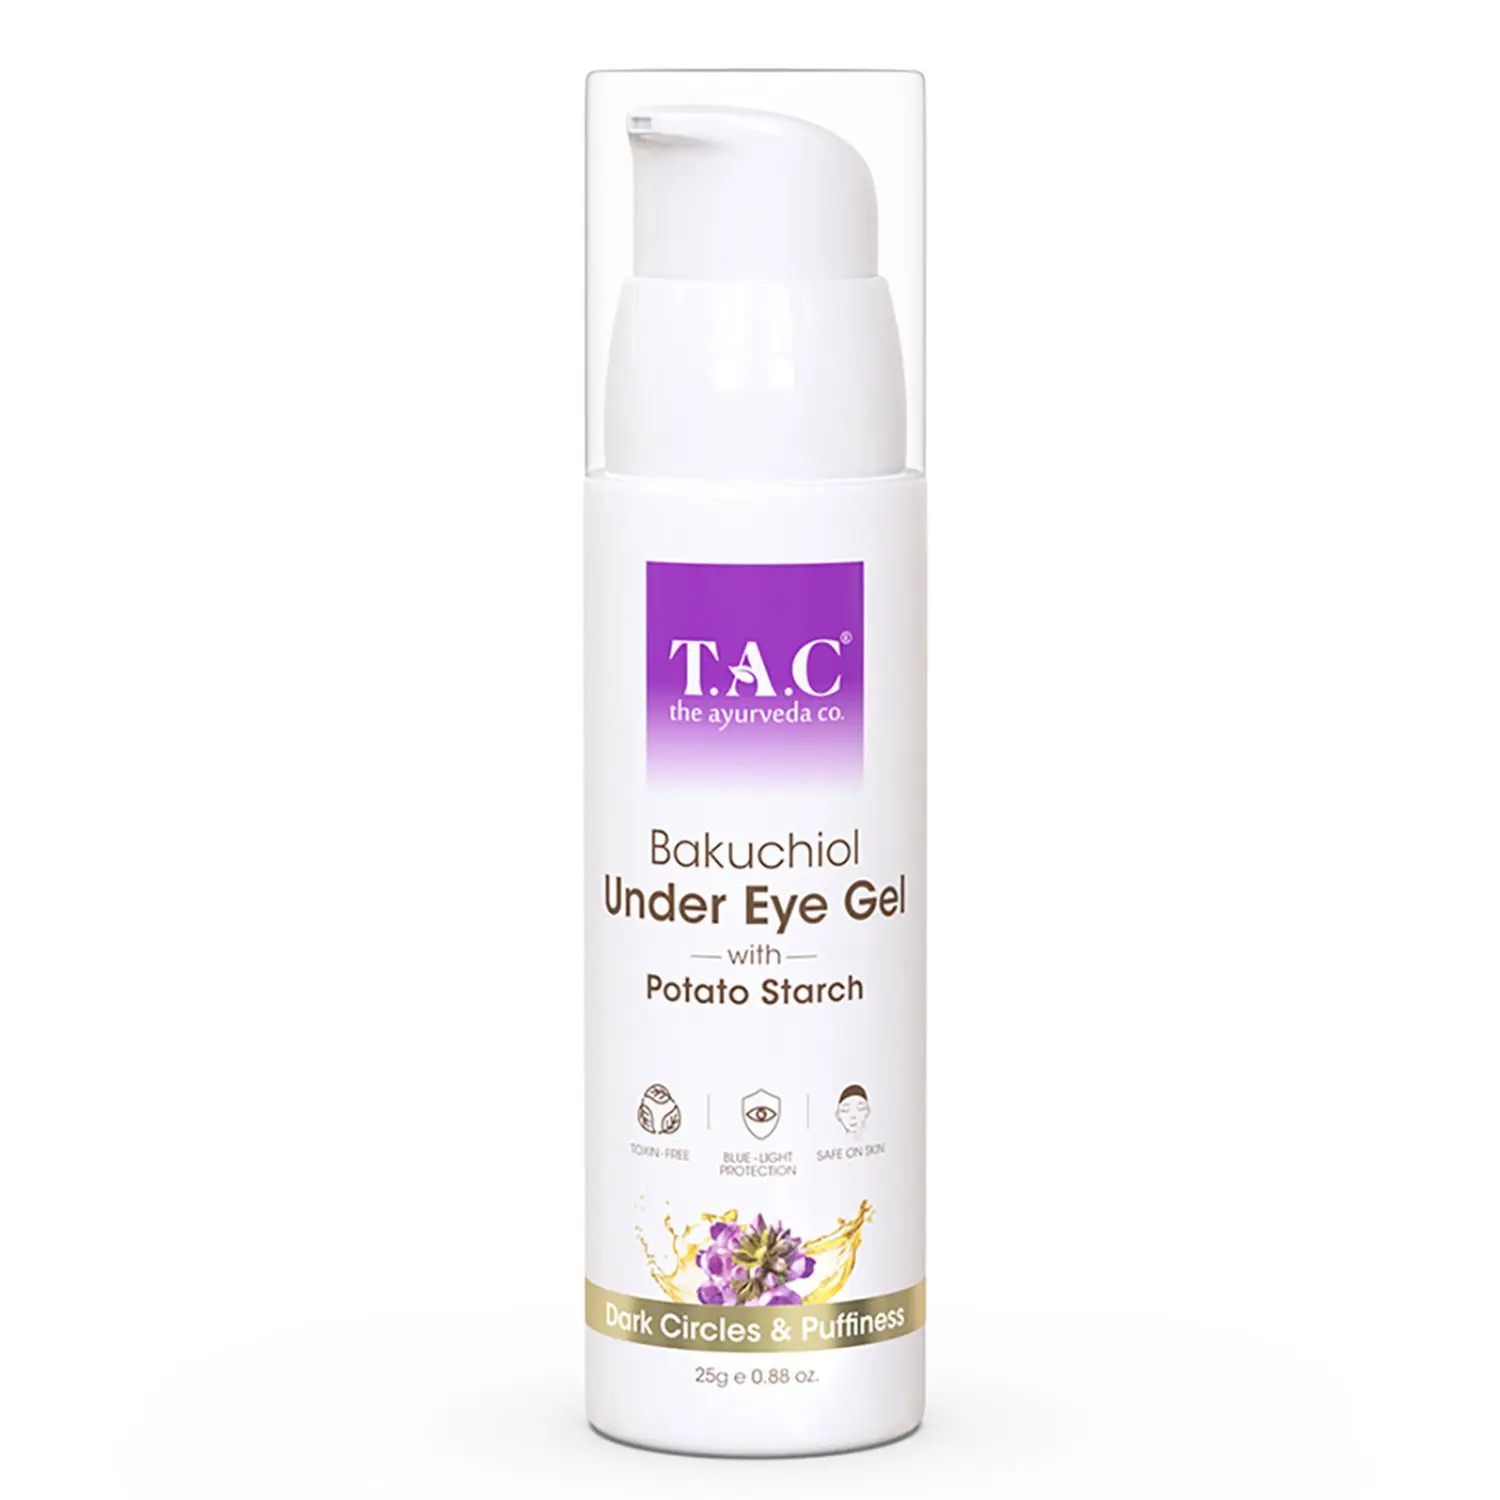 TAC - The Ayurveda Co. Bakuchiol Under Eye Gel with Potato Starch for Dark Circles and Puffiness, 25gm